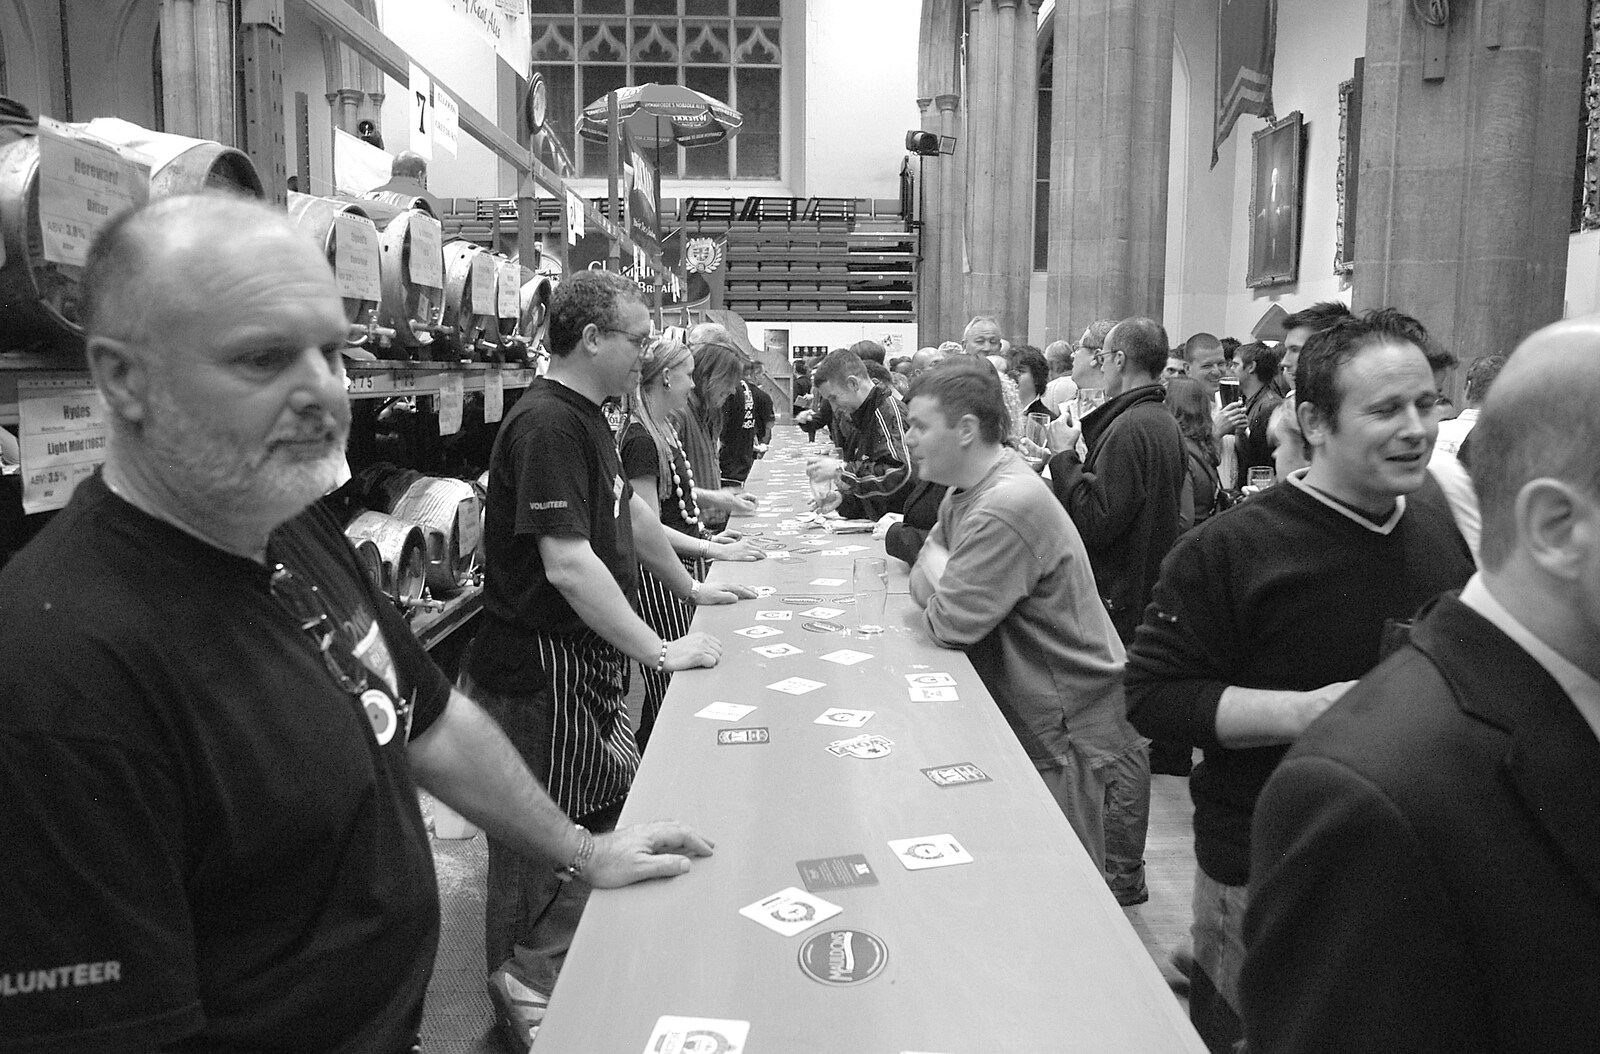 At the bar from The CAMRA Norwich Beer Festival, St. Andrew's Hall, Norwich - 25th October 2006